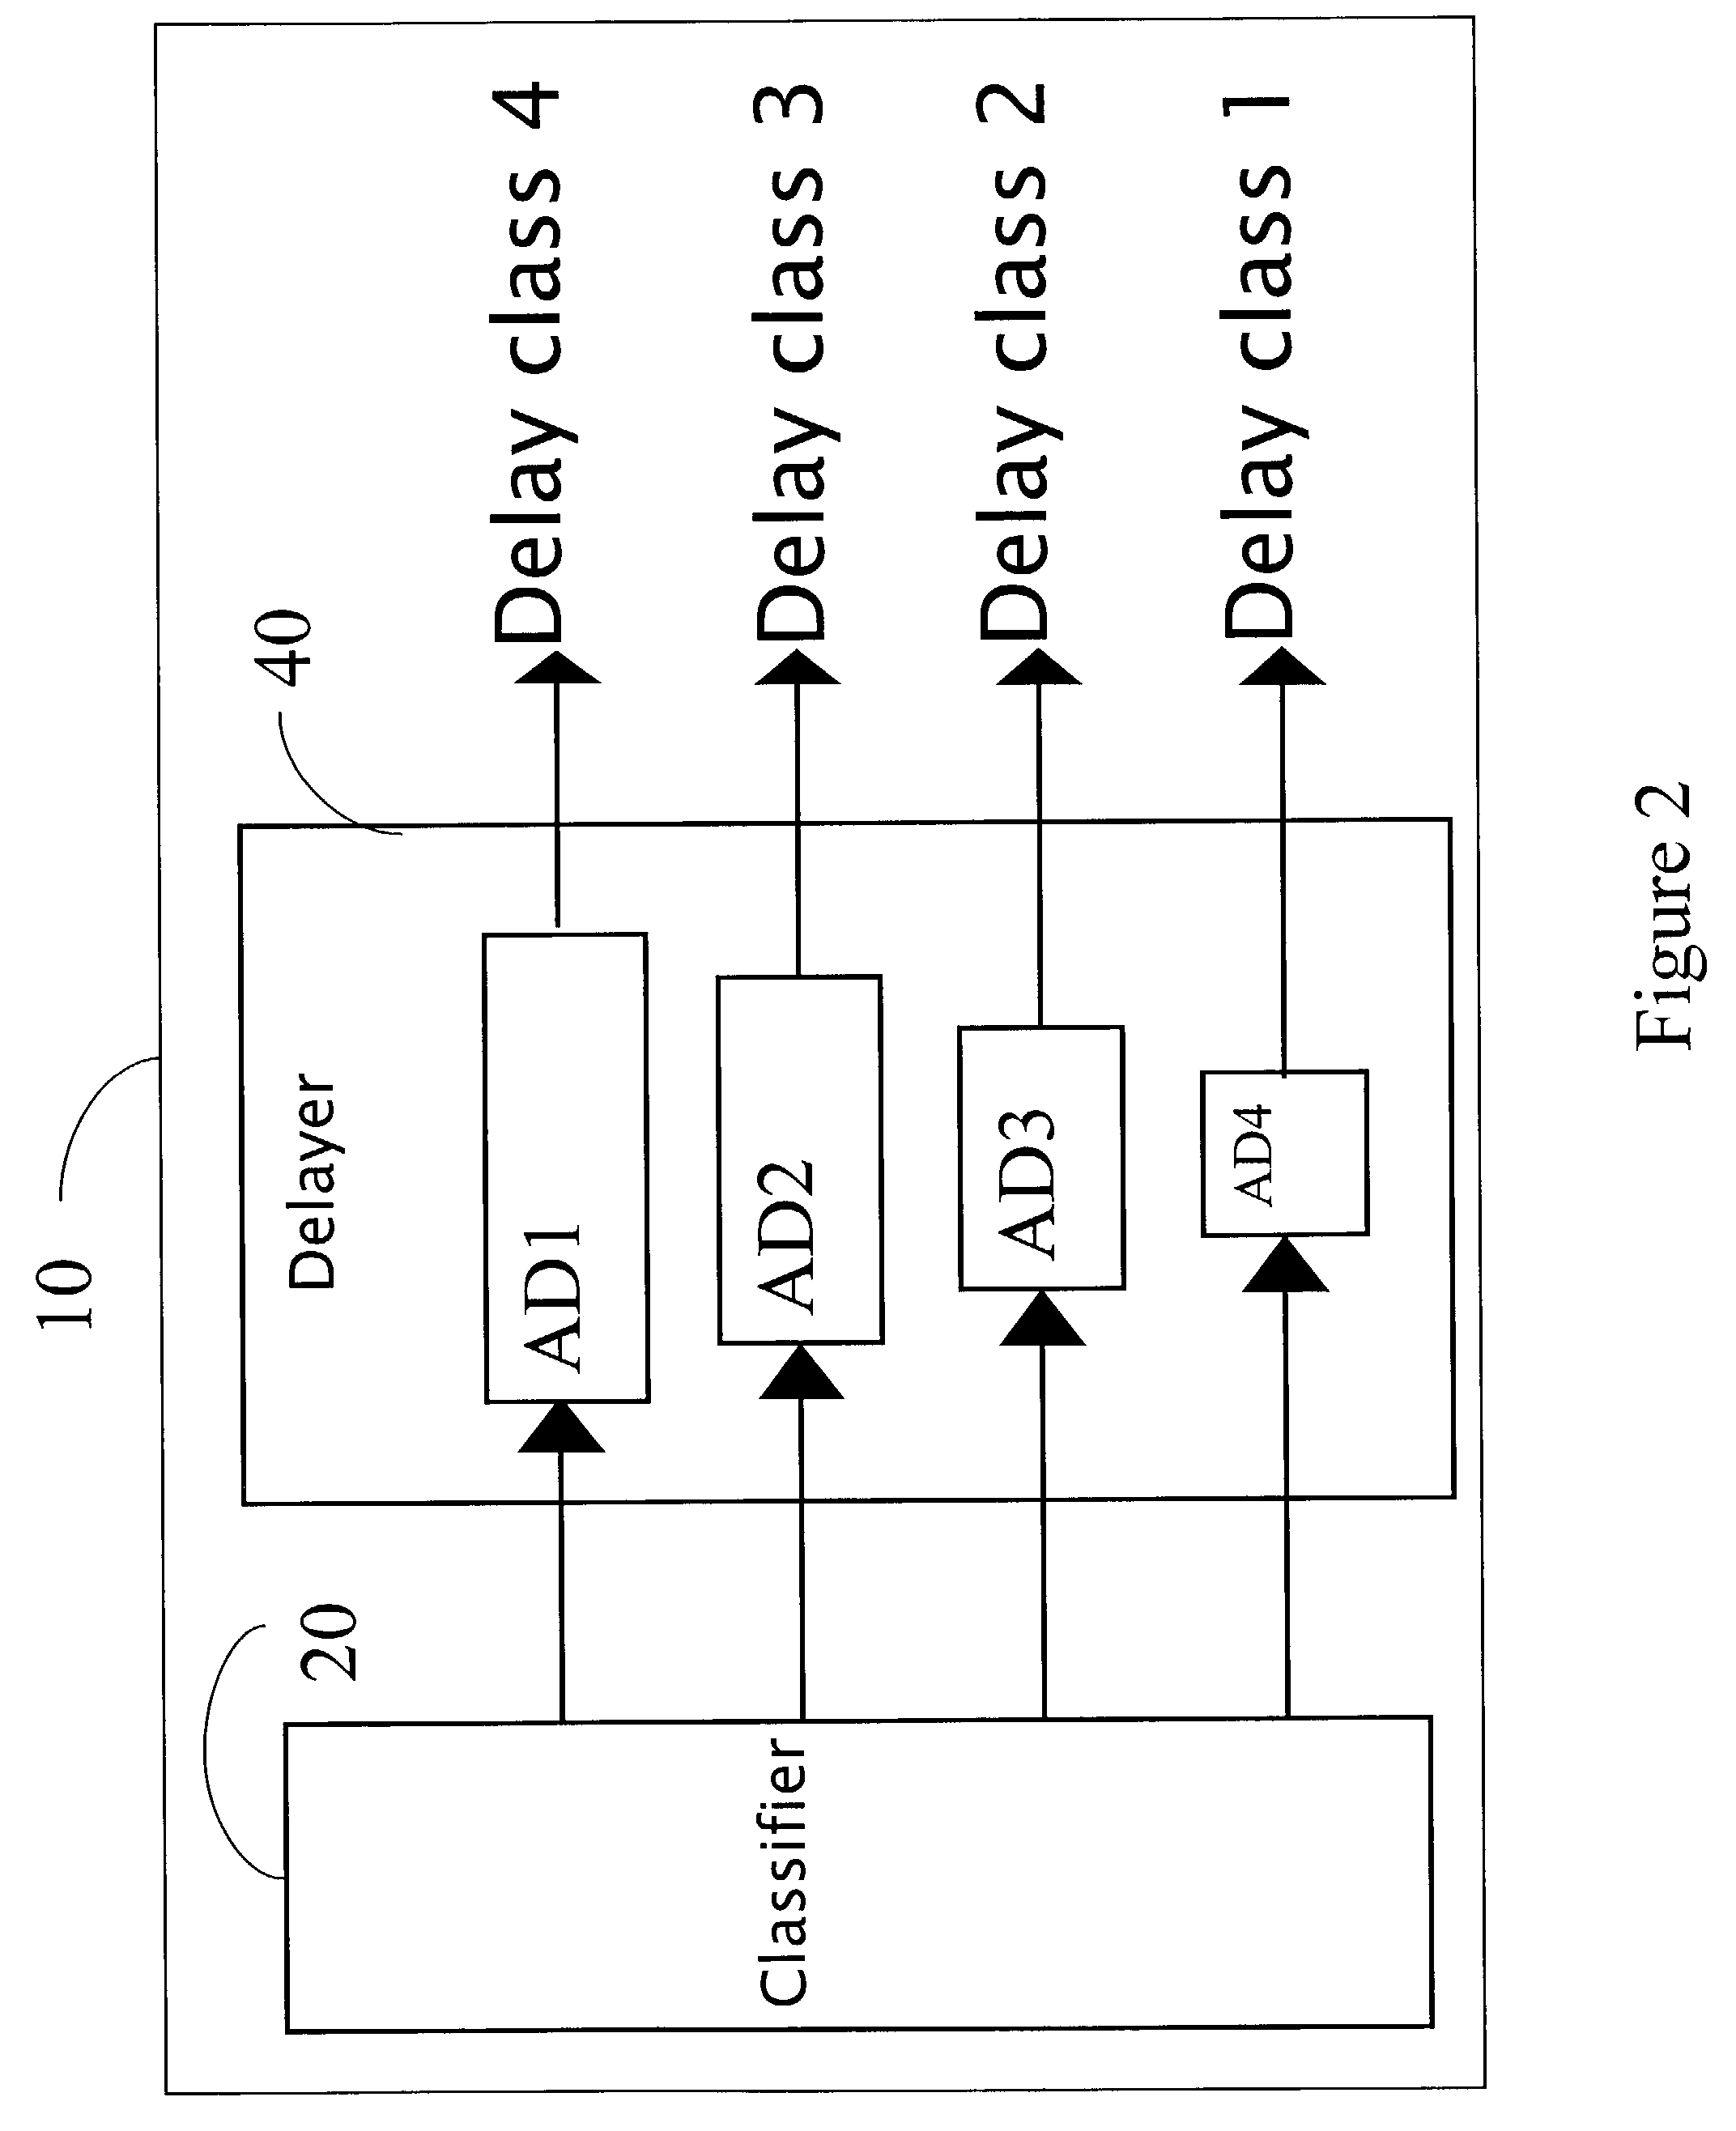 Method and apparatus for differentiating service in a data network